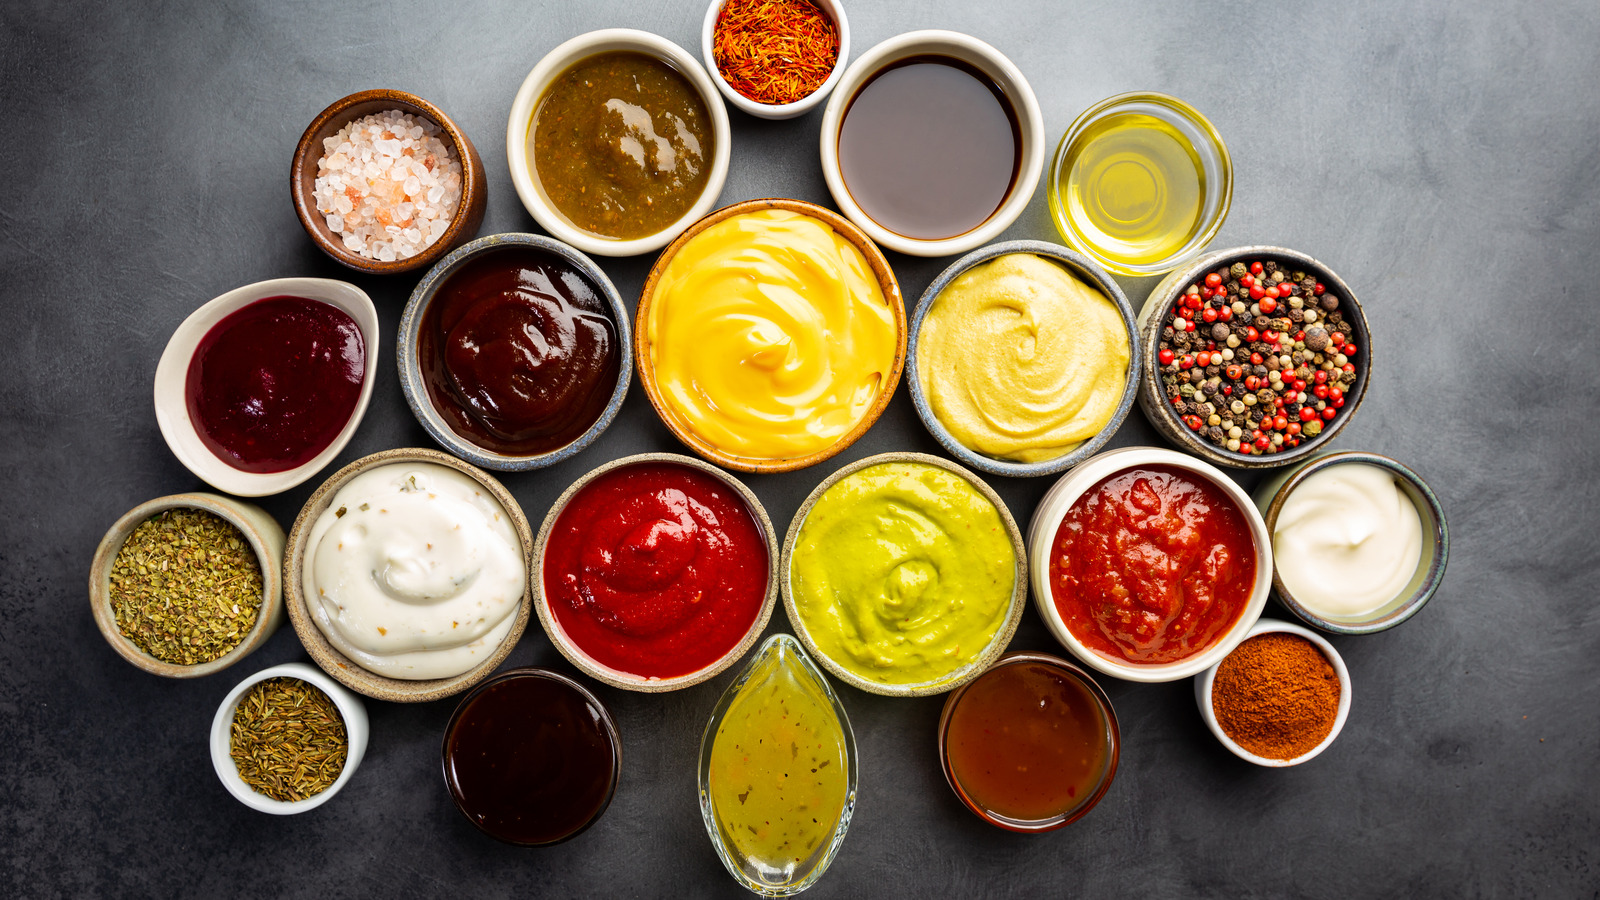 17 British Sauces And Condiments You Should Know